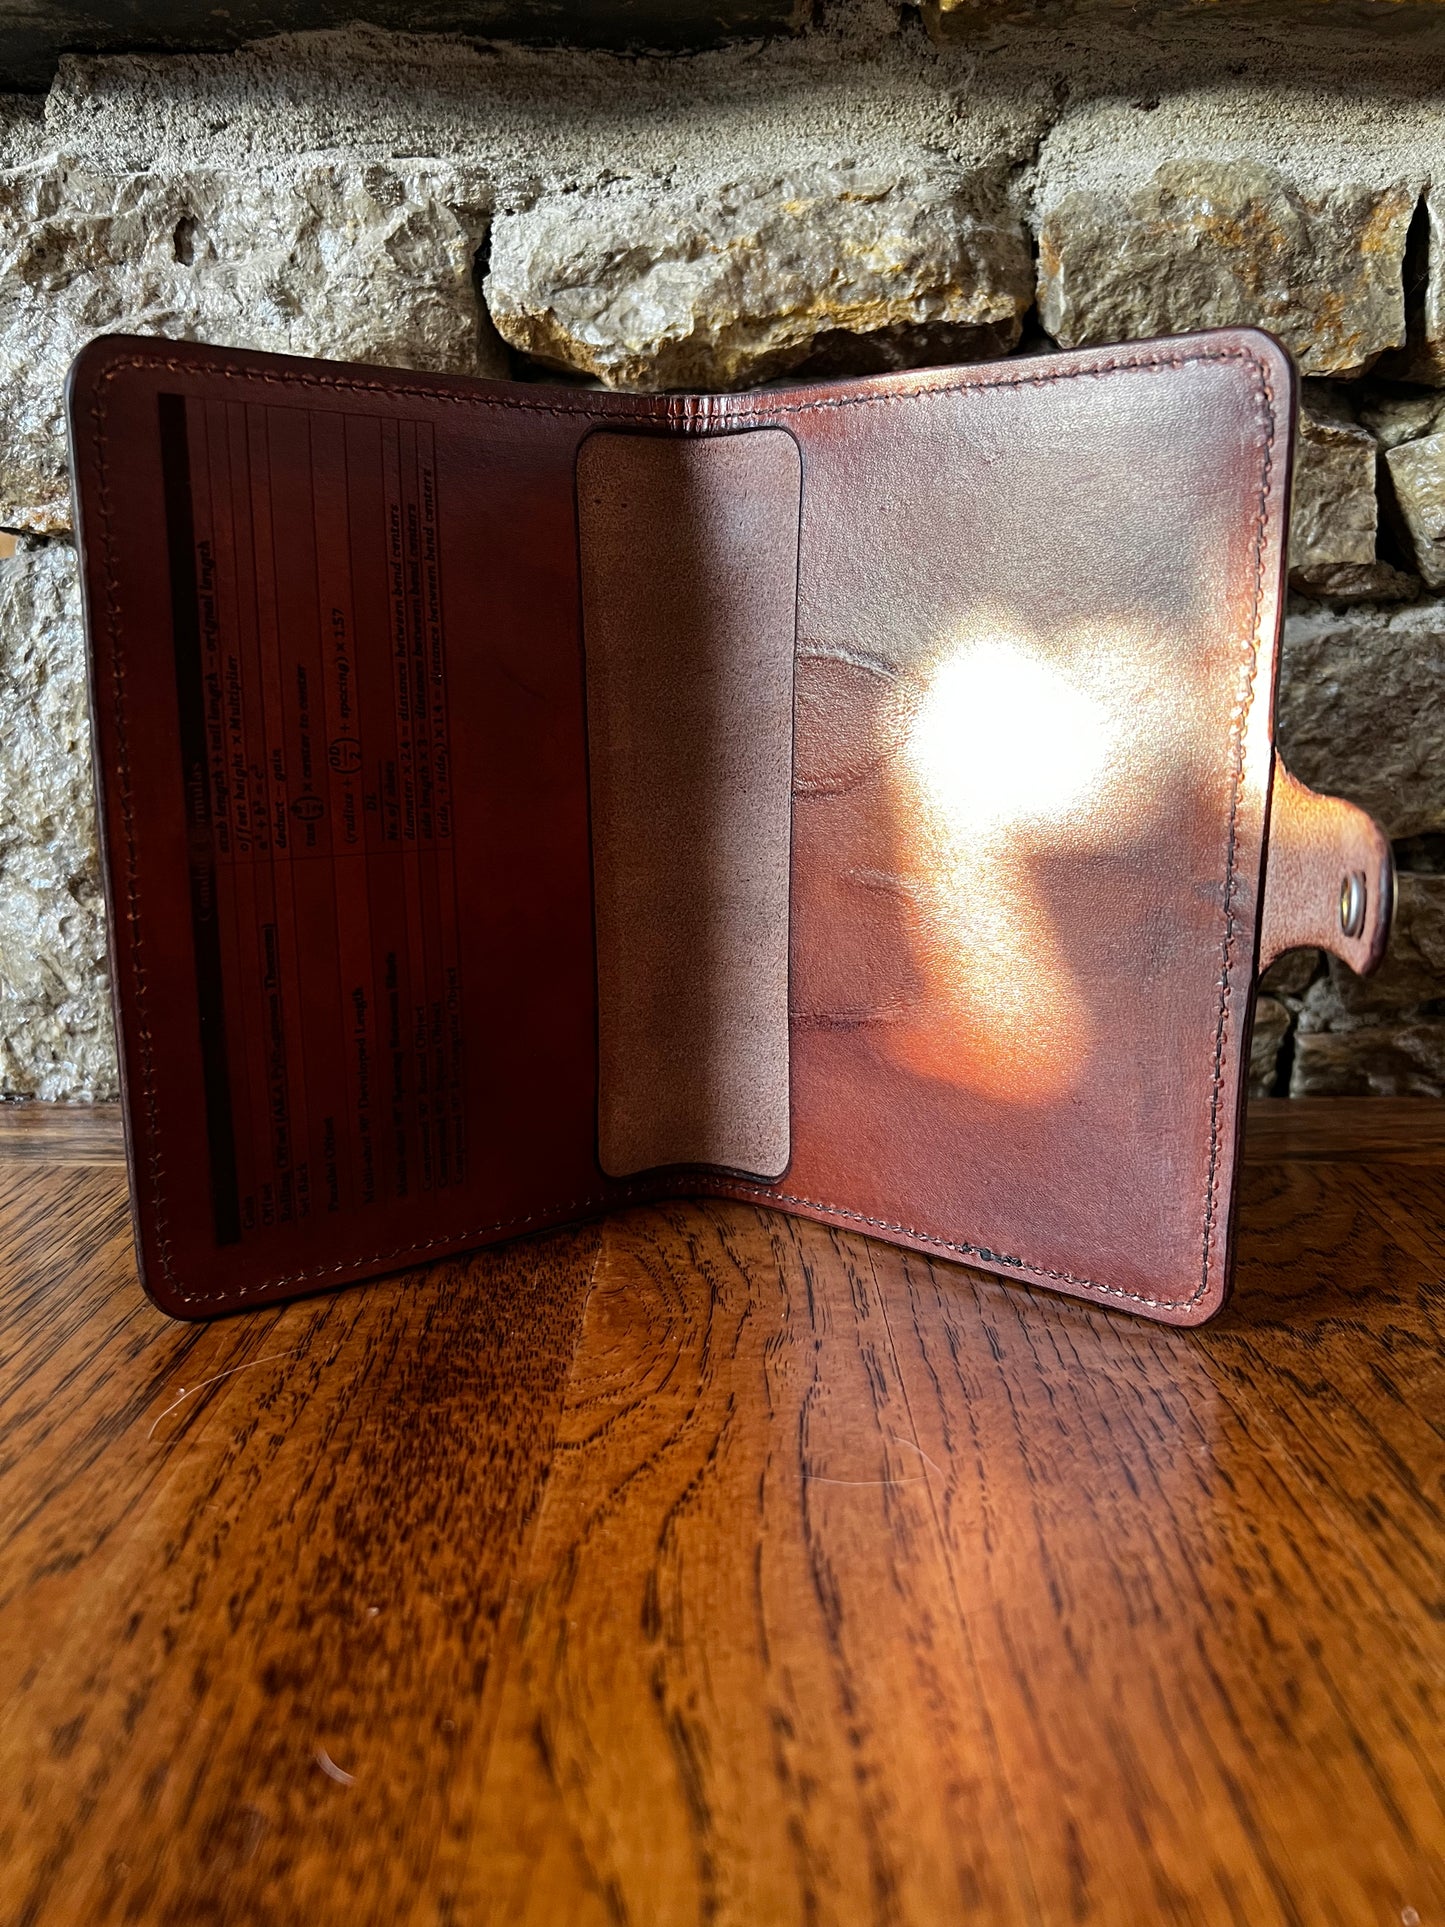 Custom Leather “Ugly’s” Book Cover